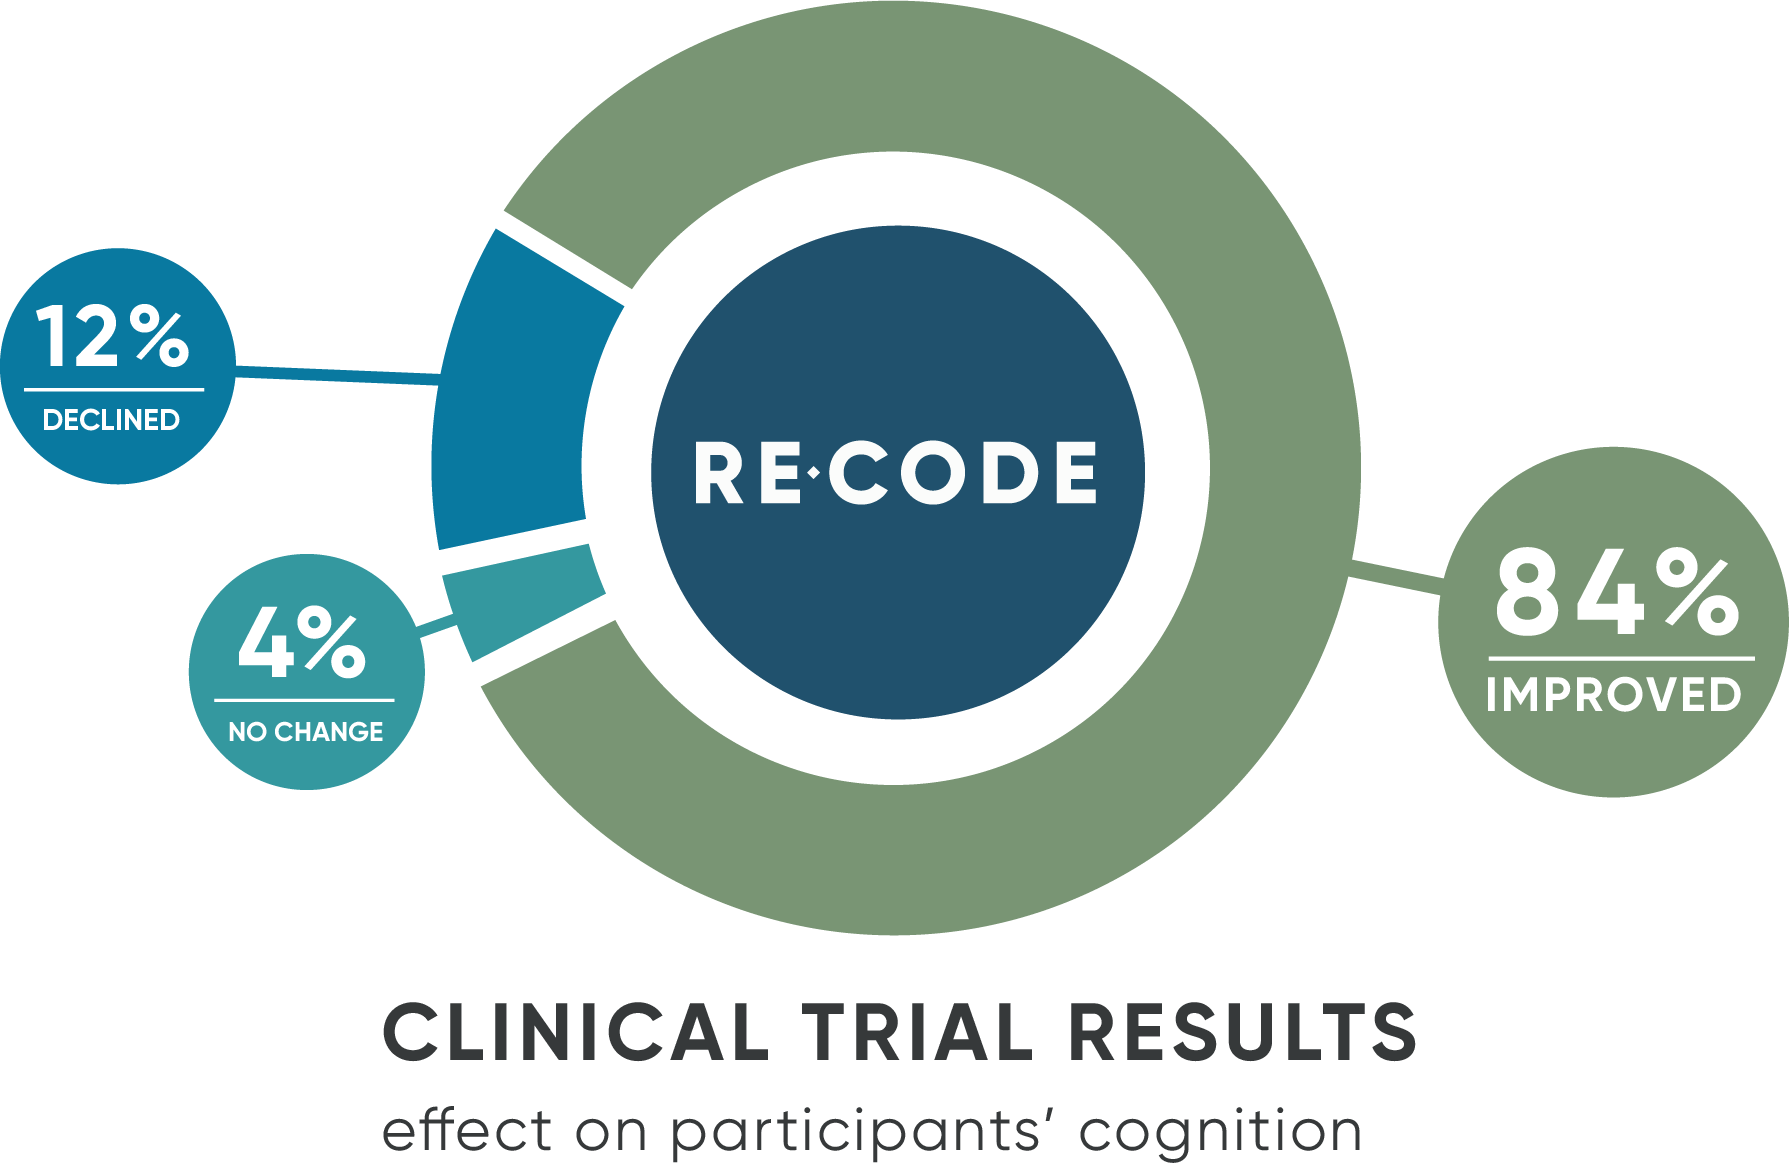 Clinical trial results effect on participants cognition